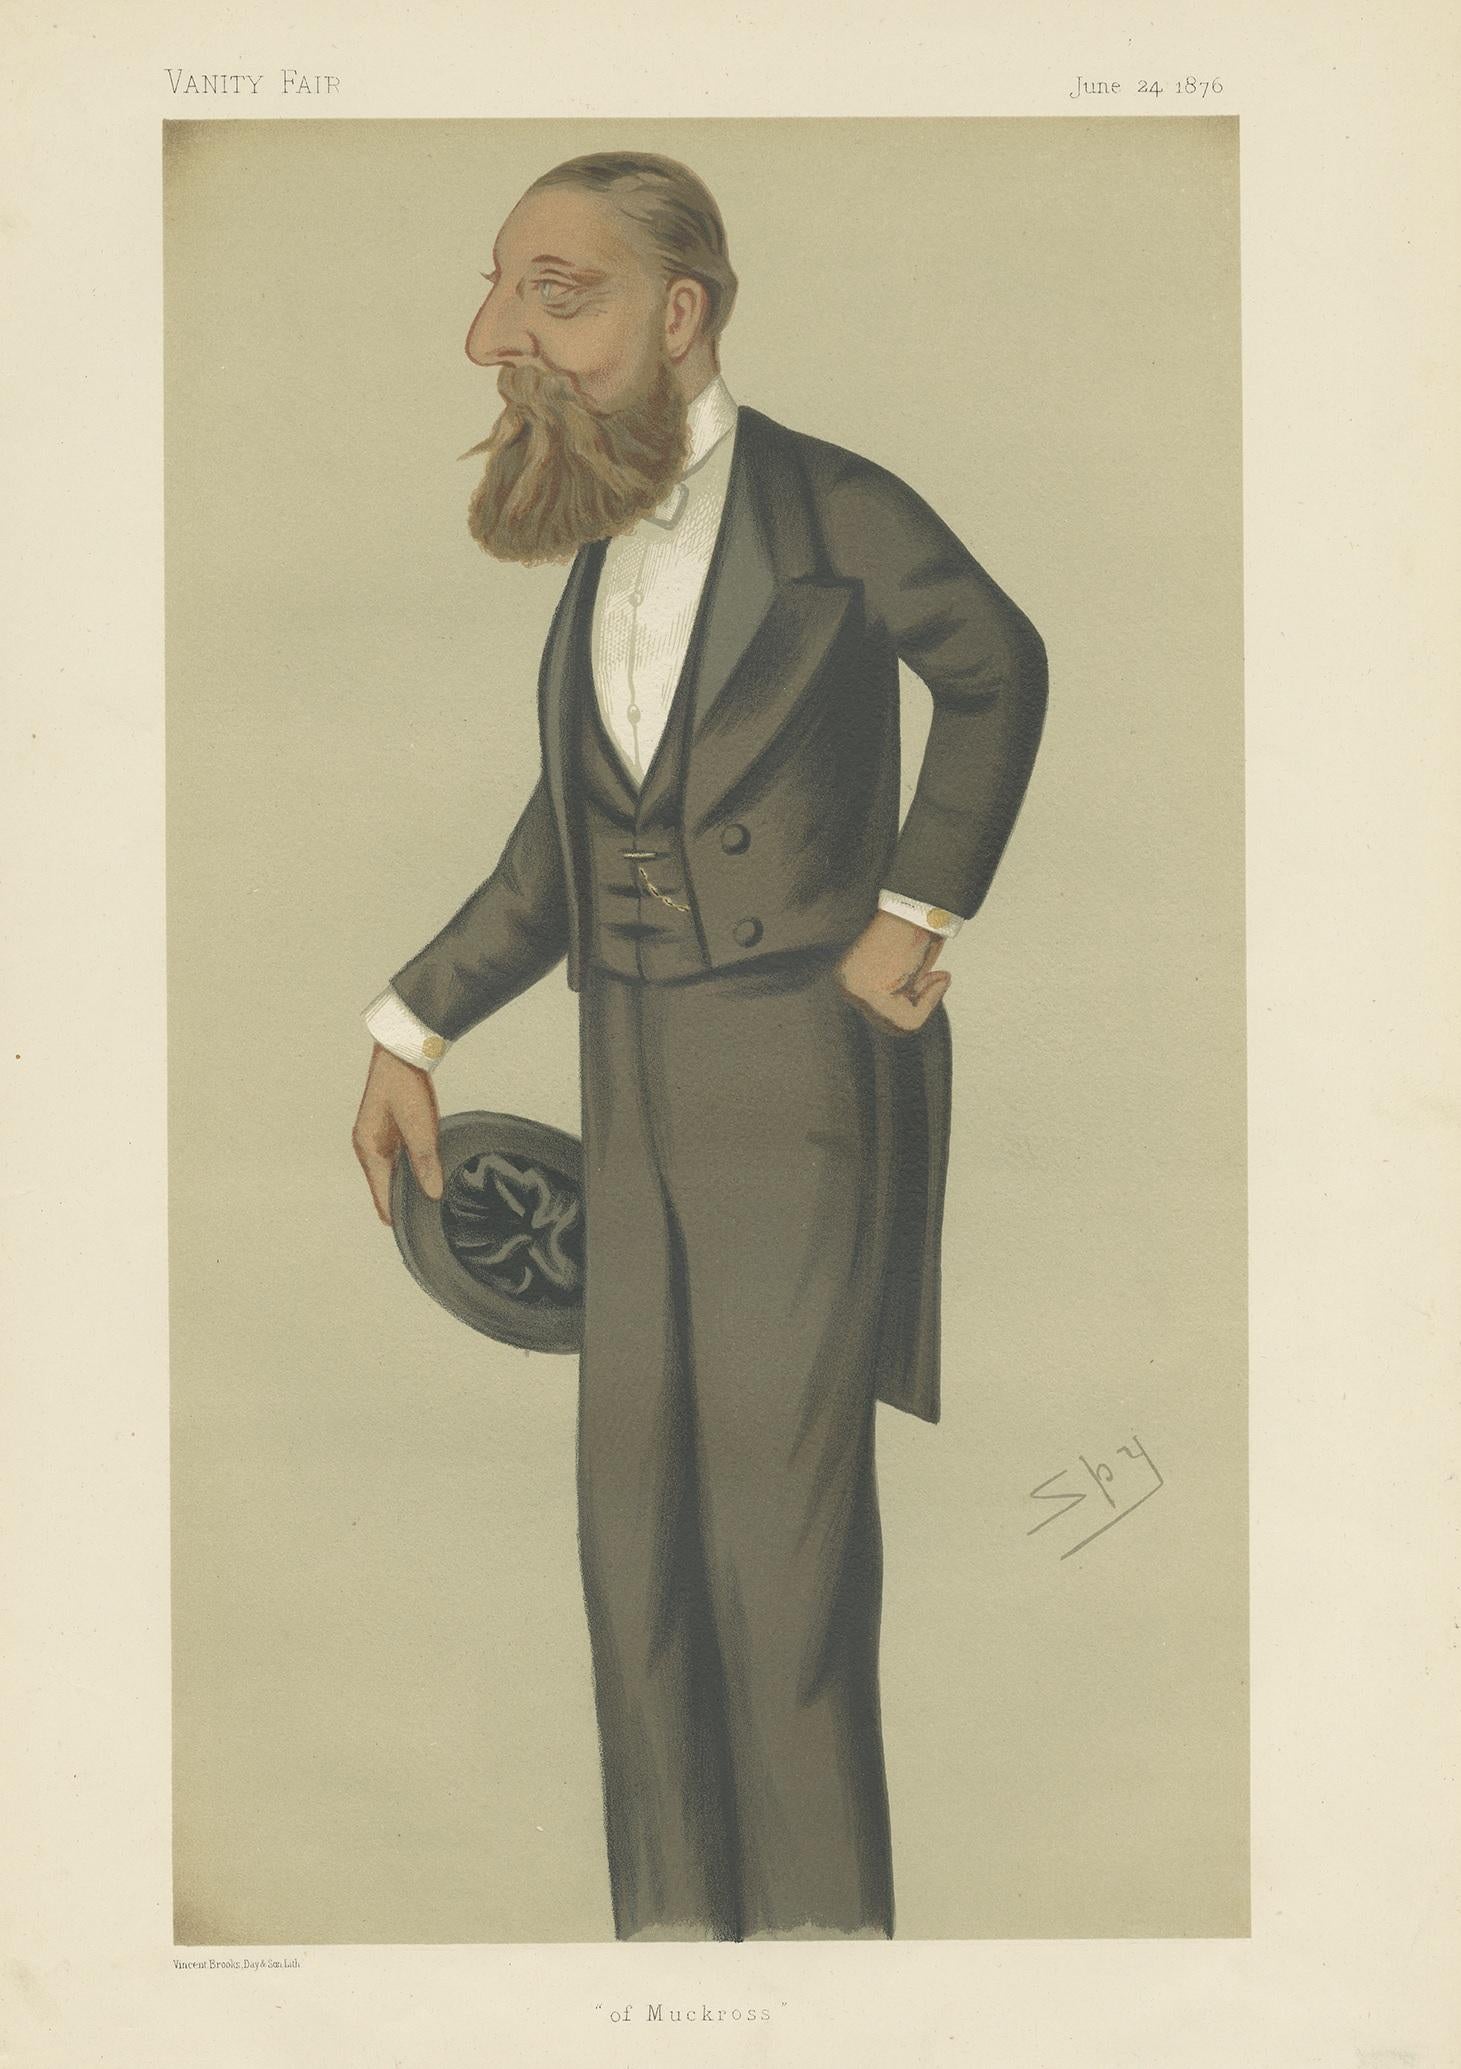 Antique print titled 'of Muckross'. Major Henry Arthur Herbert (1840–14 August 1901), was an Irish landowner and a politician in the Parliament of the United Kingdom. This caricature print originates from the Vanity Fair of June 24, 1876.